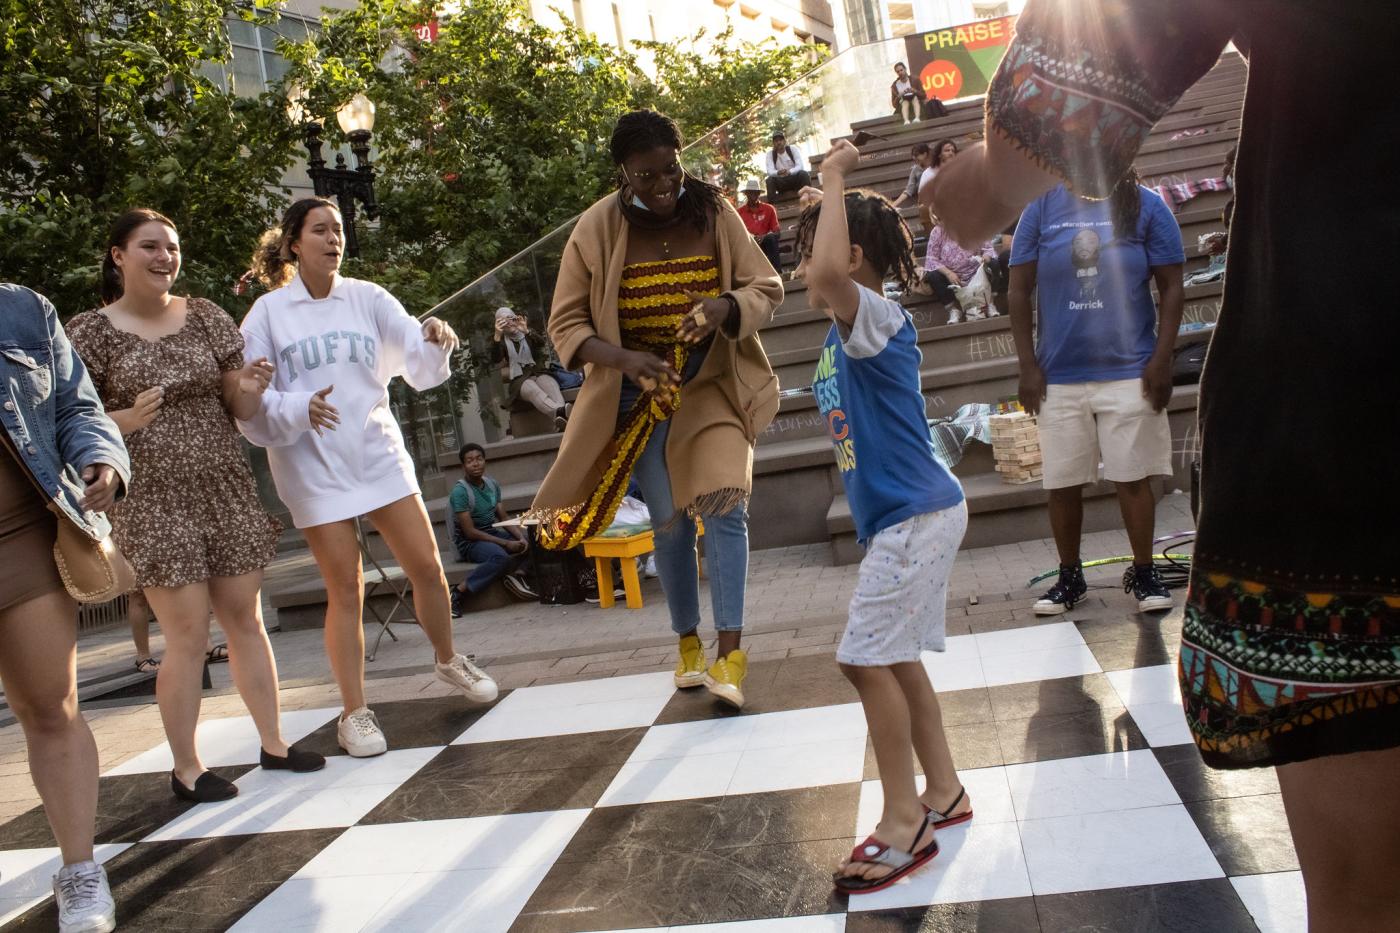 In a circle of folks, a young Black boy dances on top of a black and white checker board ground.